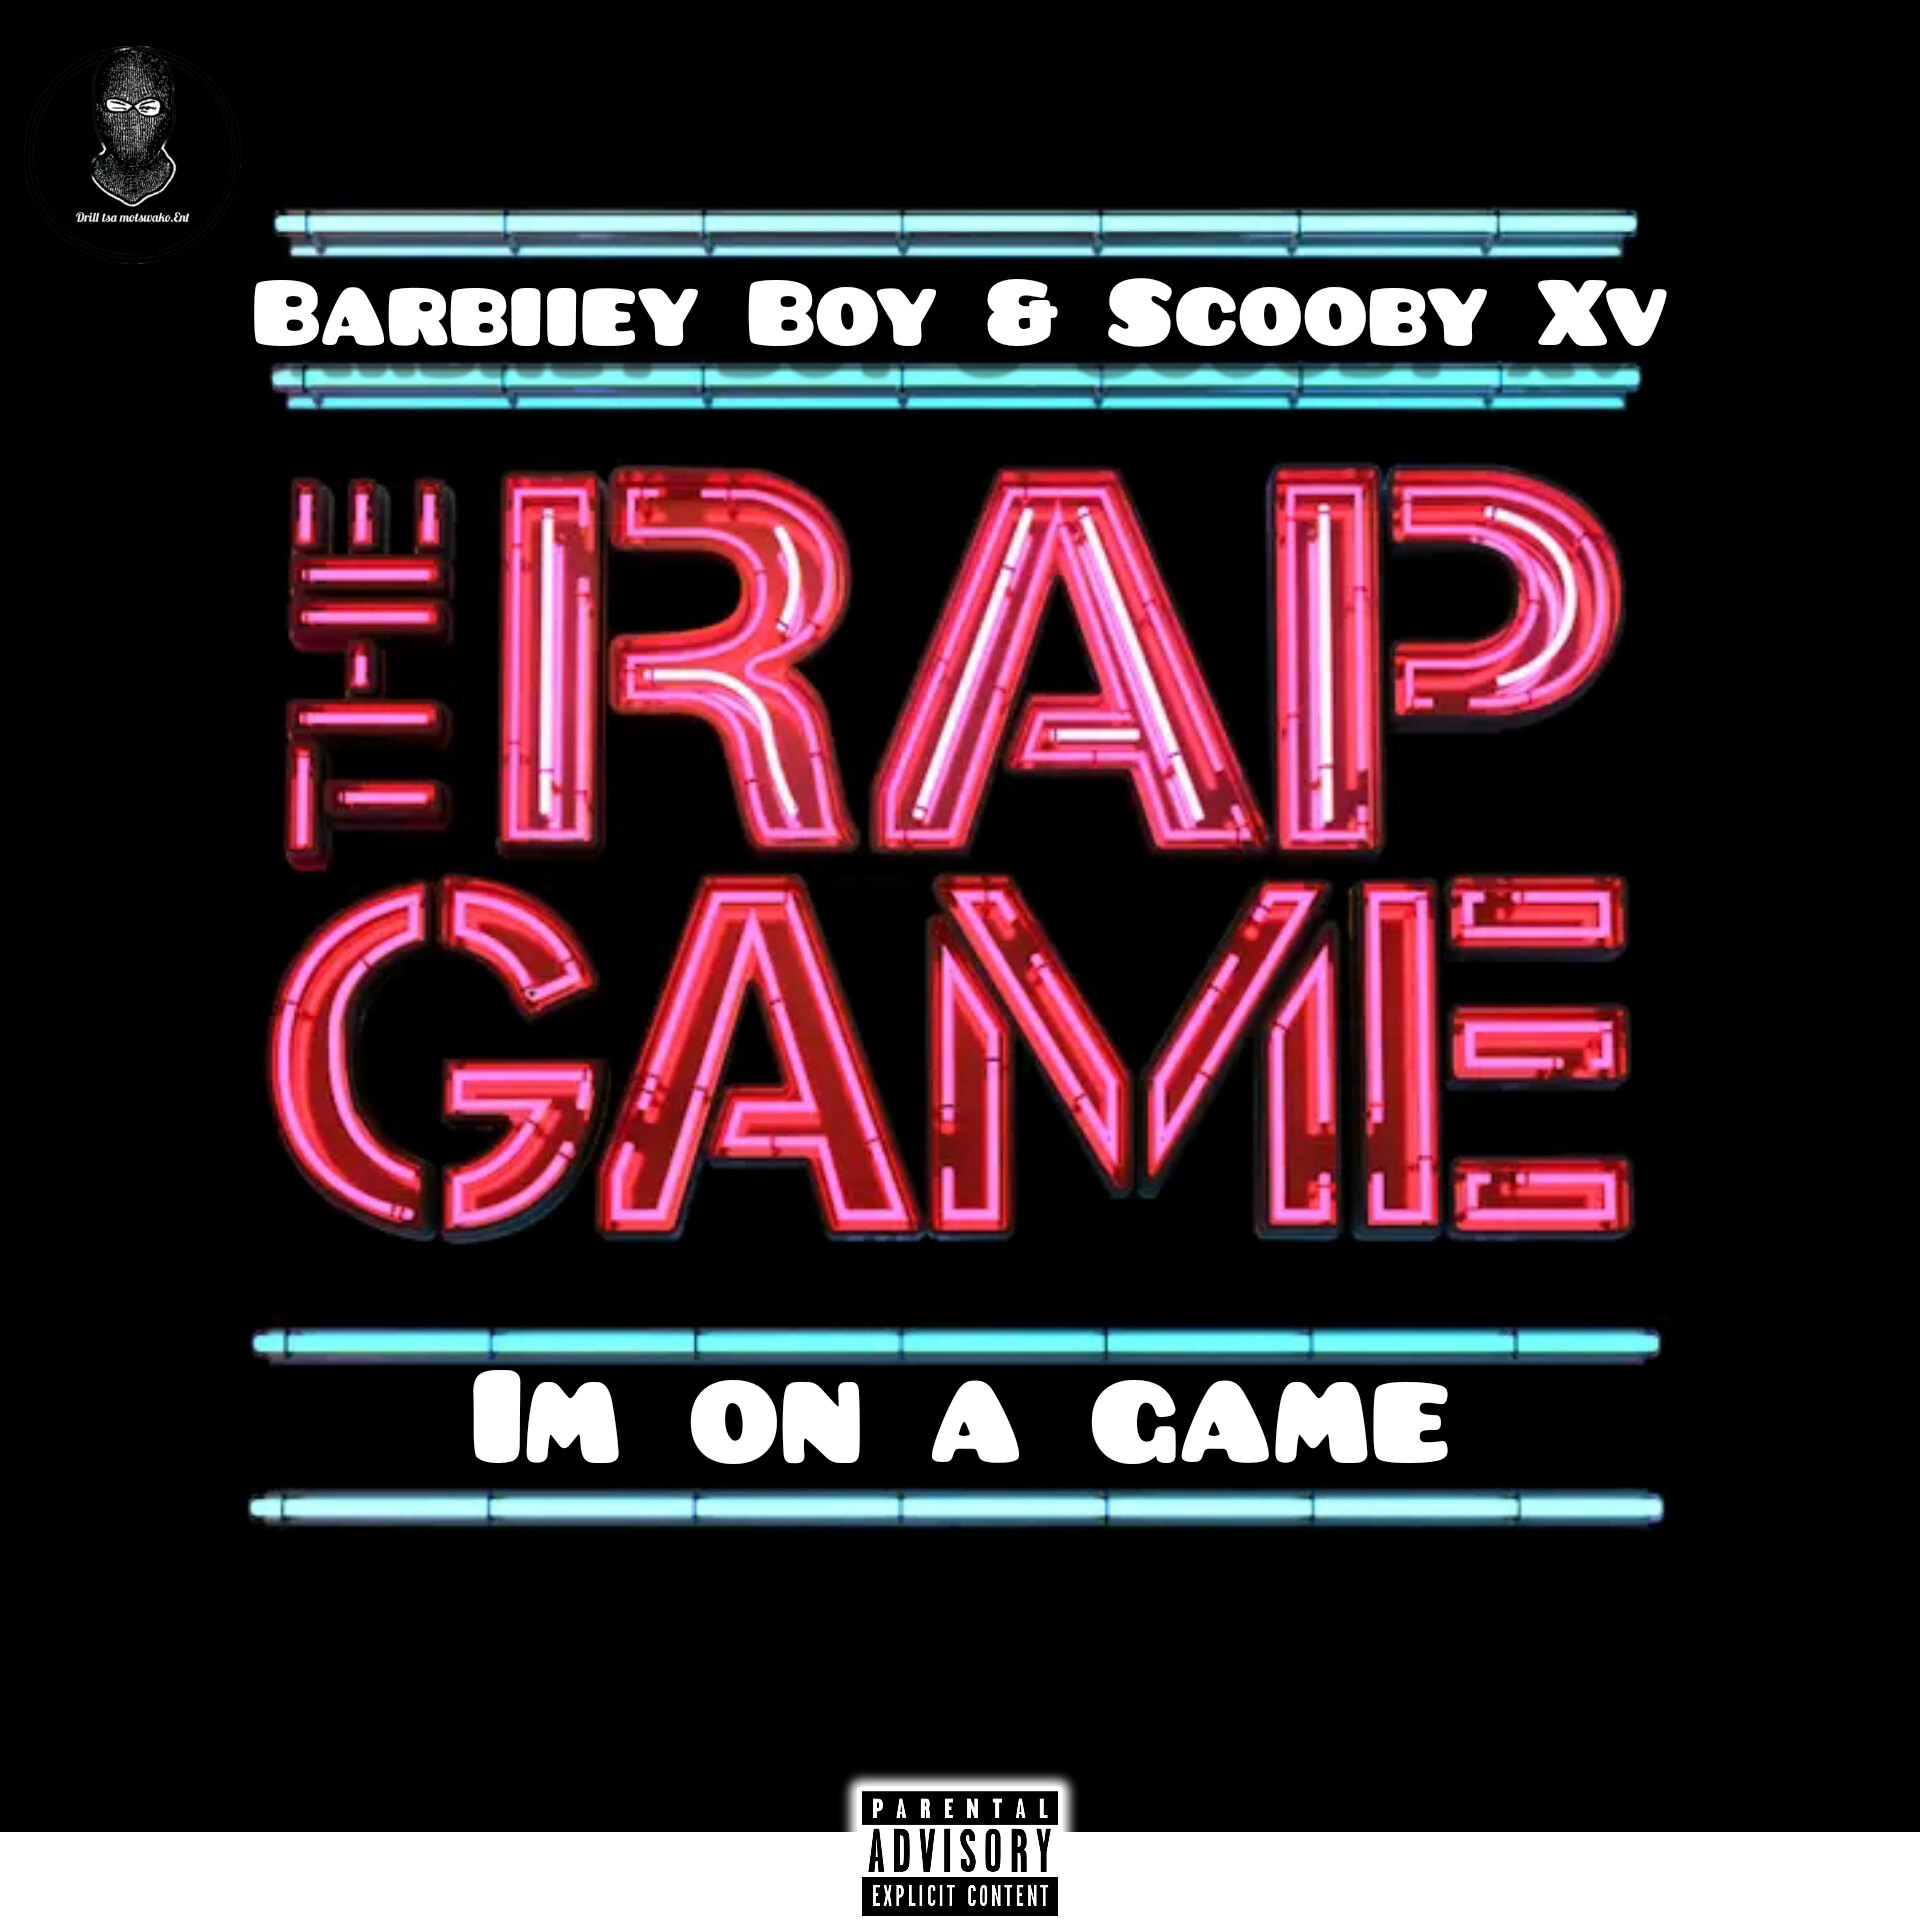 Im on the Game - BARBIIEY BOY & SCOOBY XV